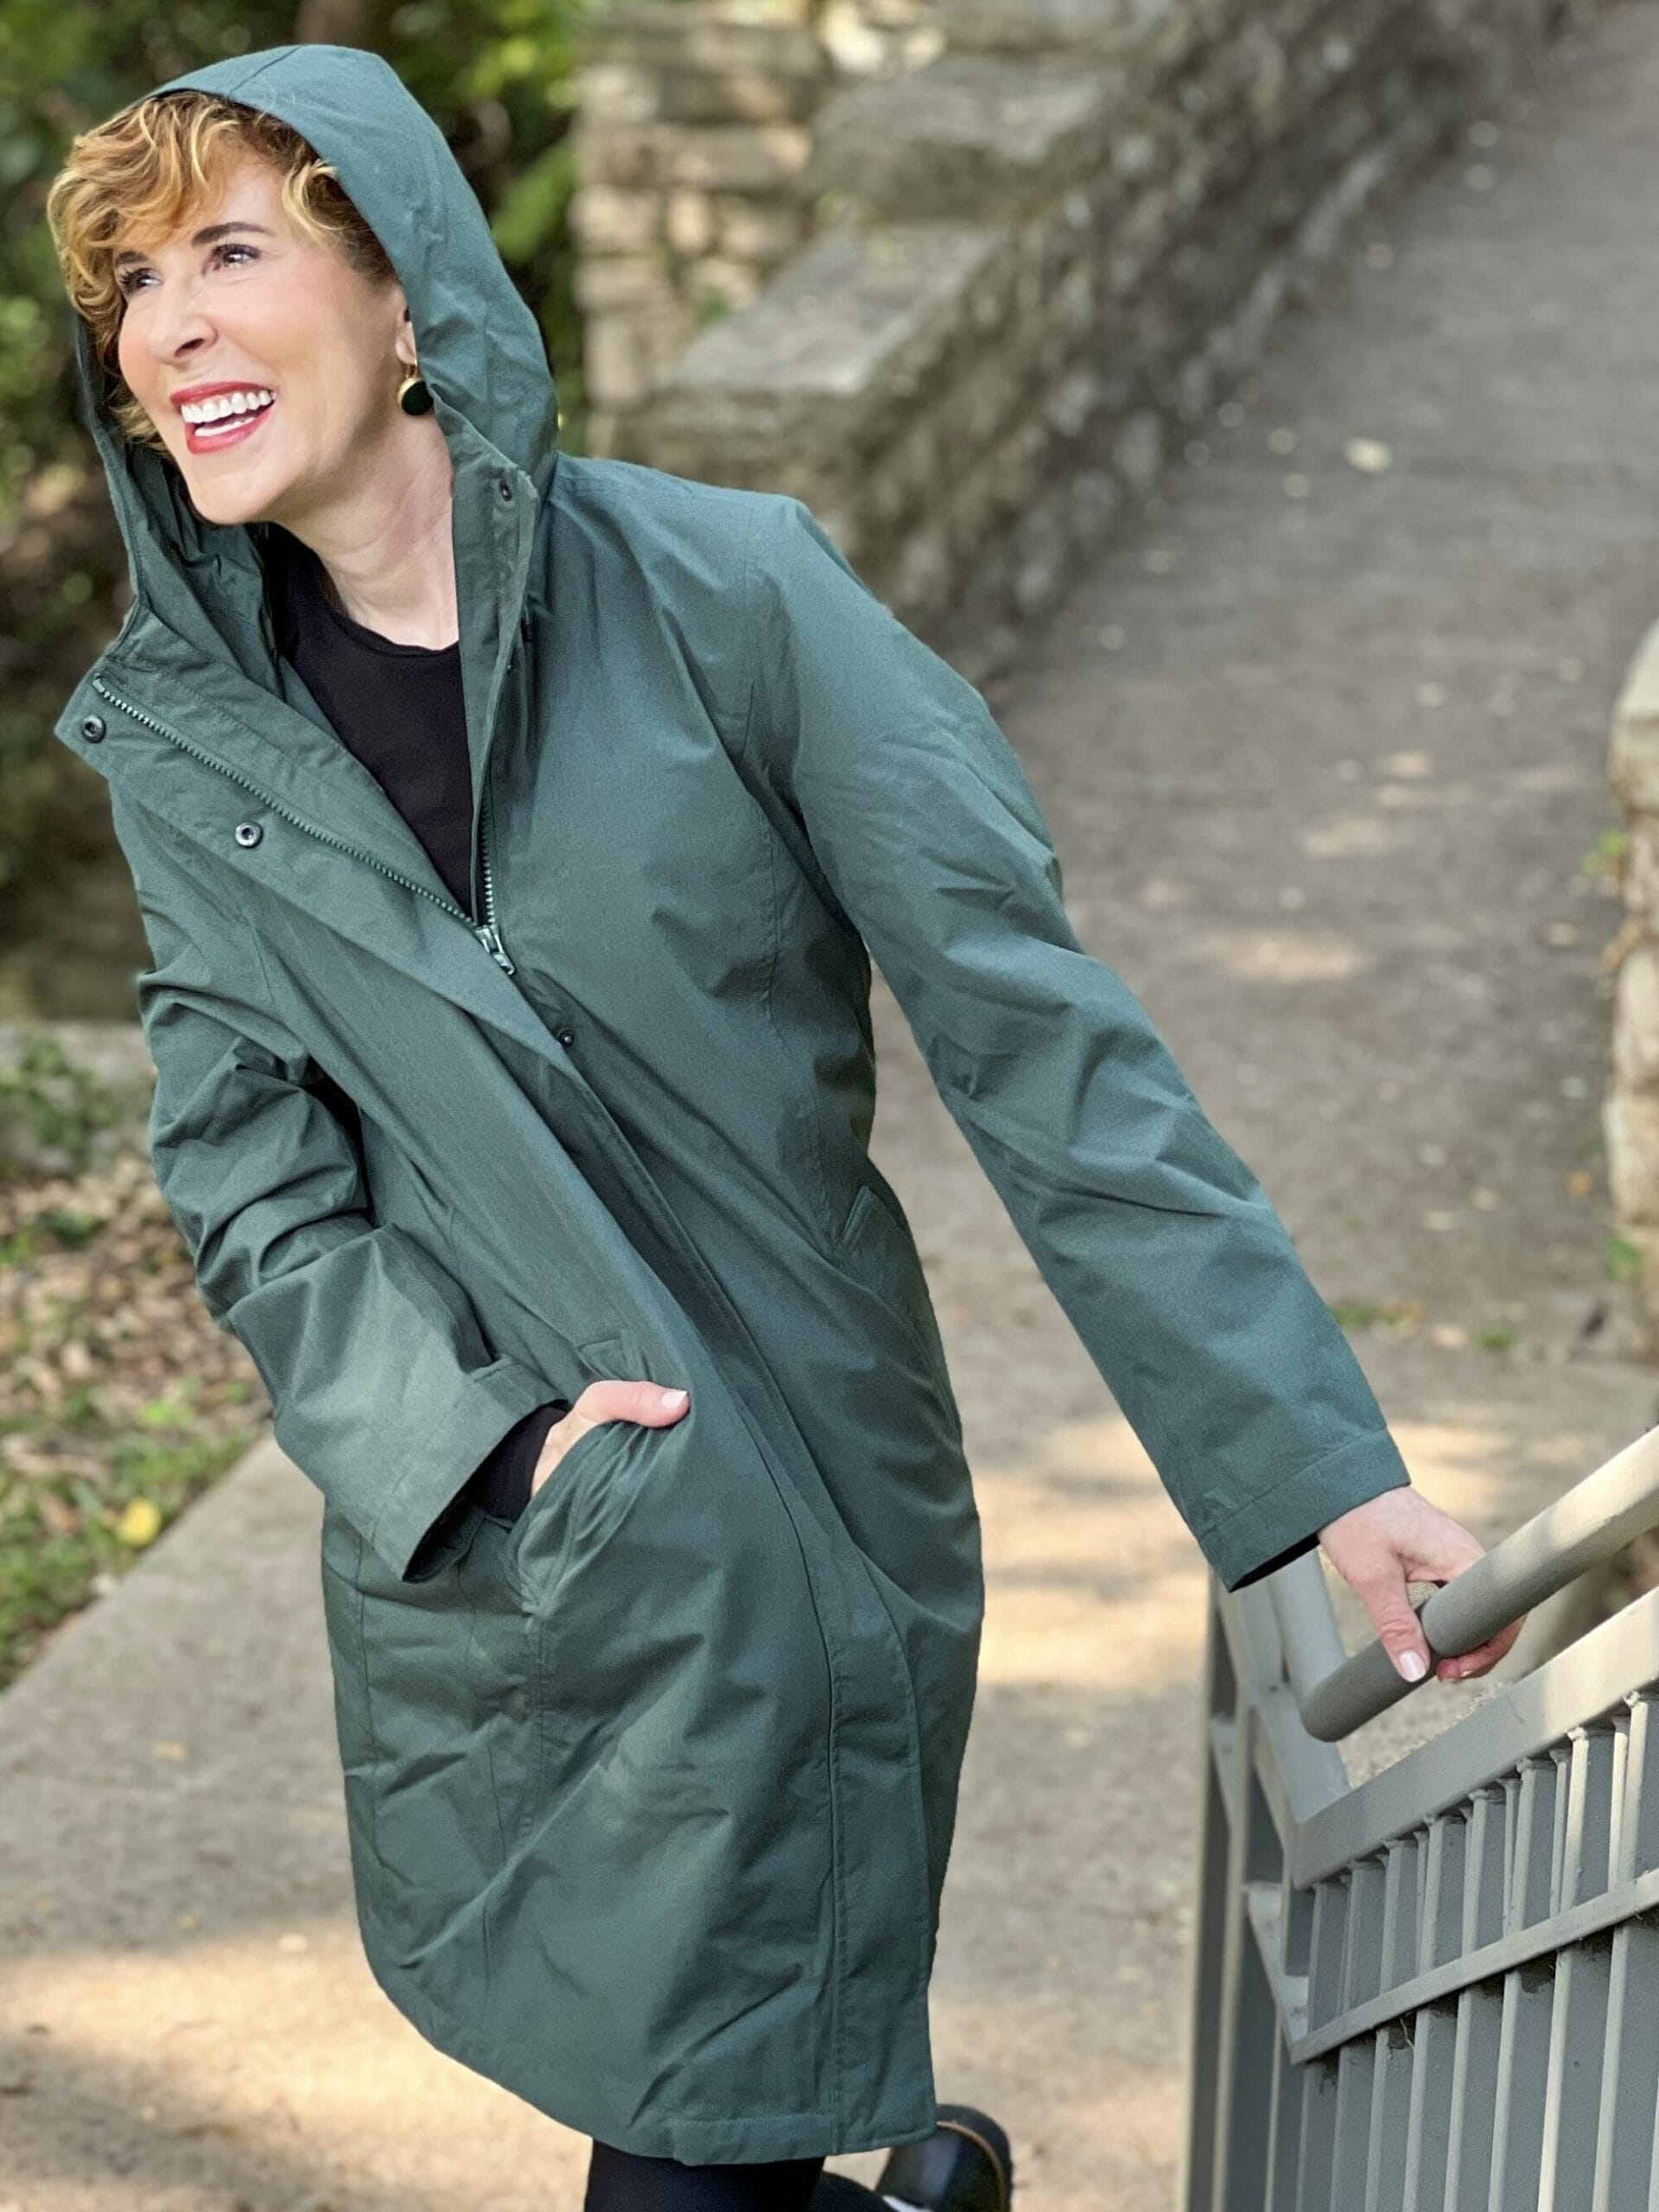 woman wearing green land's end Women's Insulated 3 in 1 Primaloft Parka – outer rain coat part - and black leggings standing by a staircase in the park